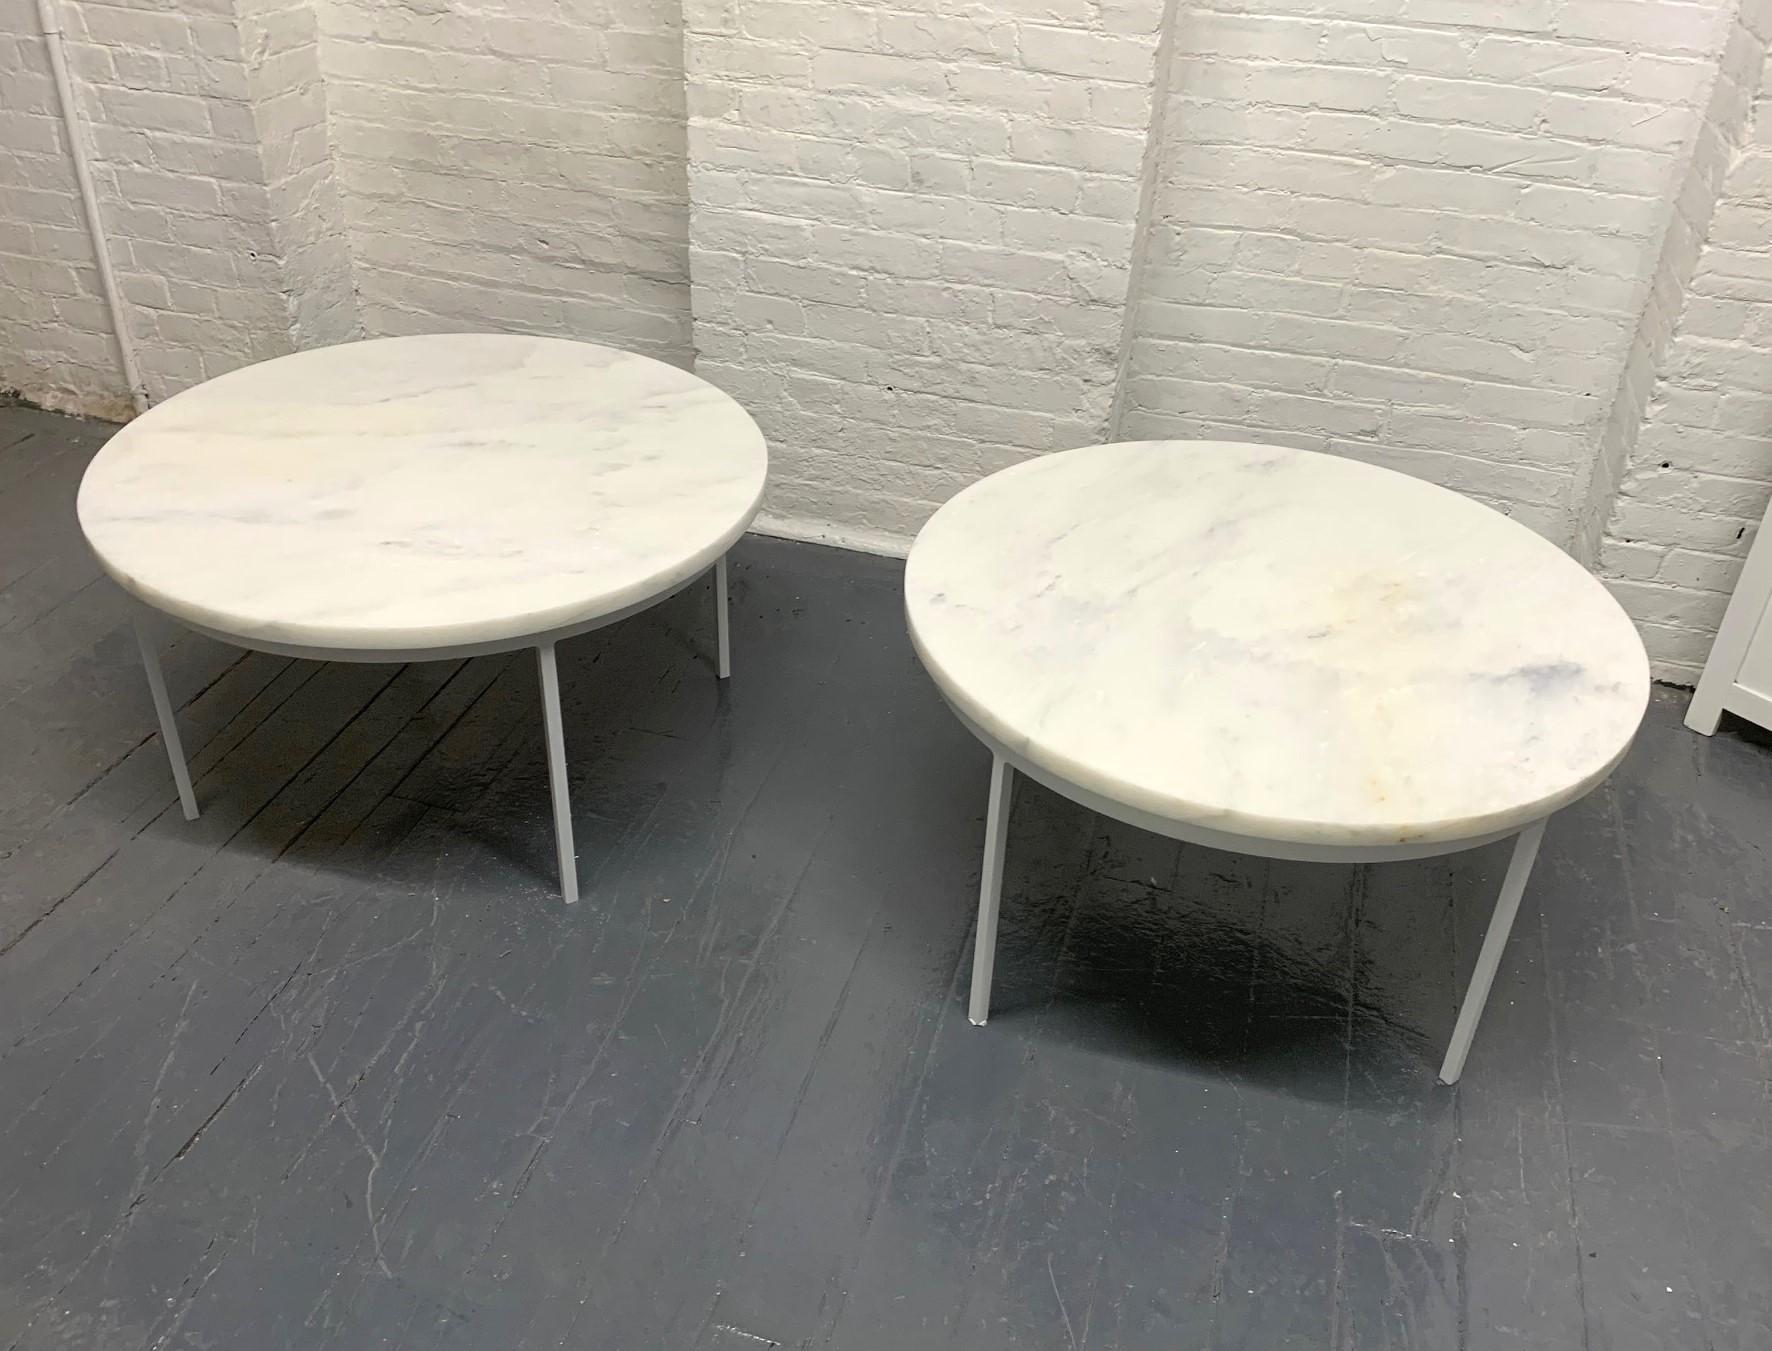 Pair of Nicos Zographos Style Carrara marble-top tables. The base is white painted iron with a one-inch thick Carrara marble top.